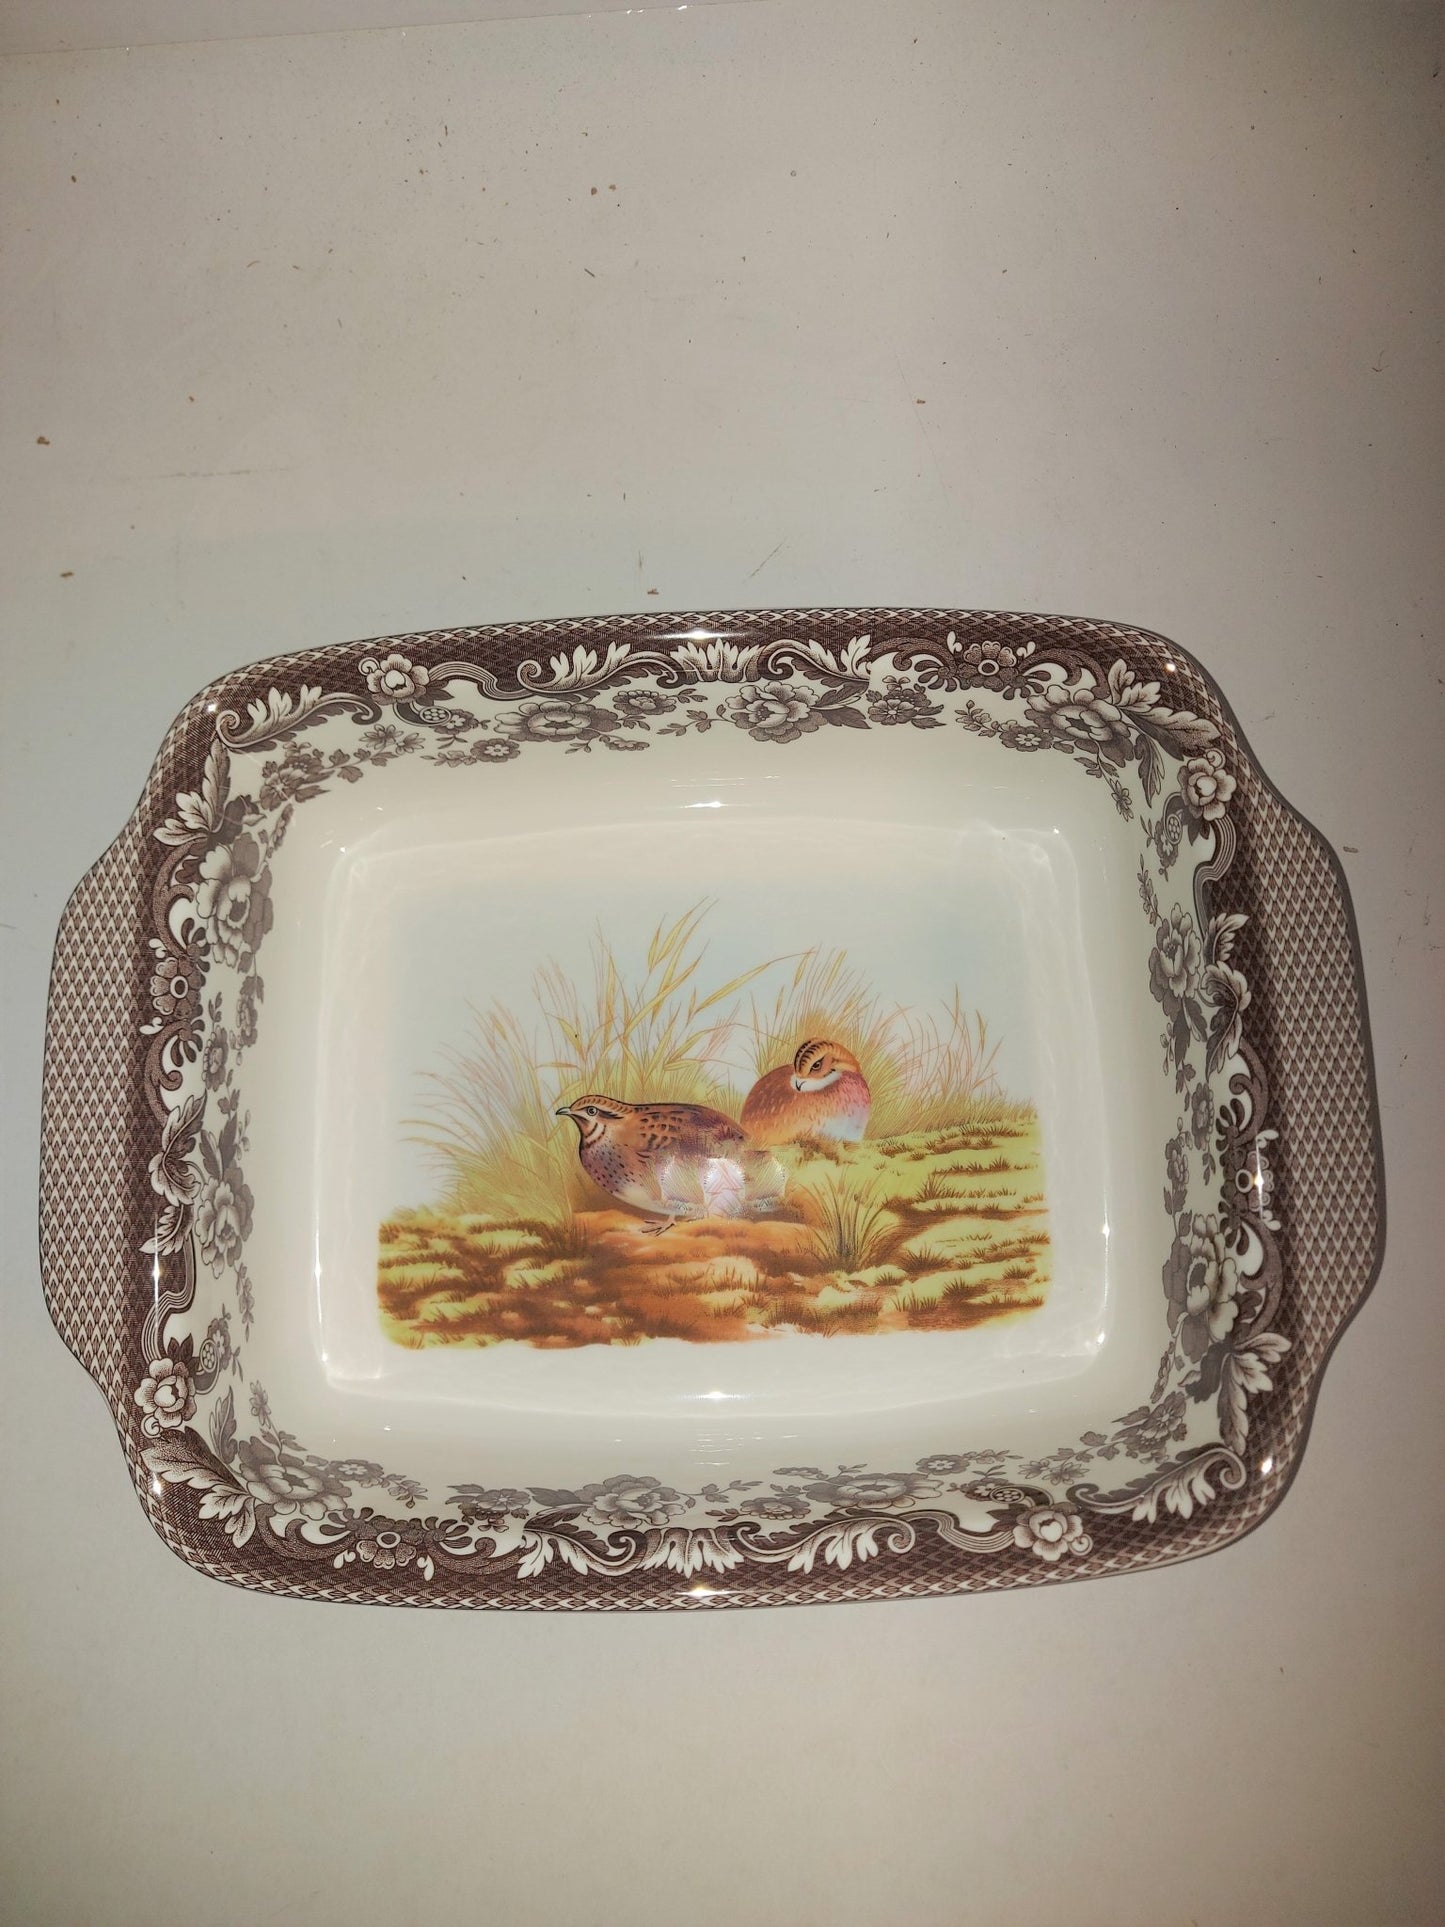 Spode Woodland Rectangle ( Lasagne) Handled Dish 12 inch x 9inch - Shoppedeals